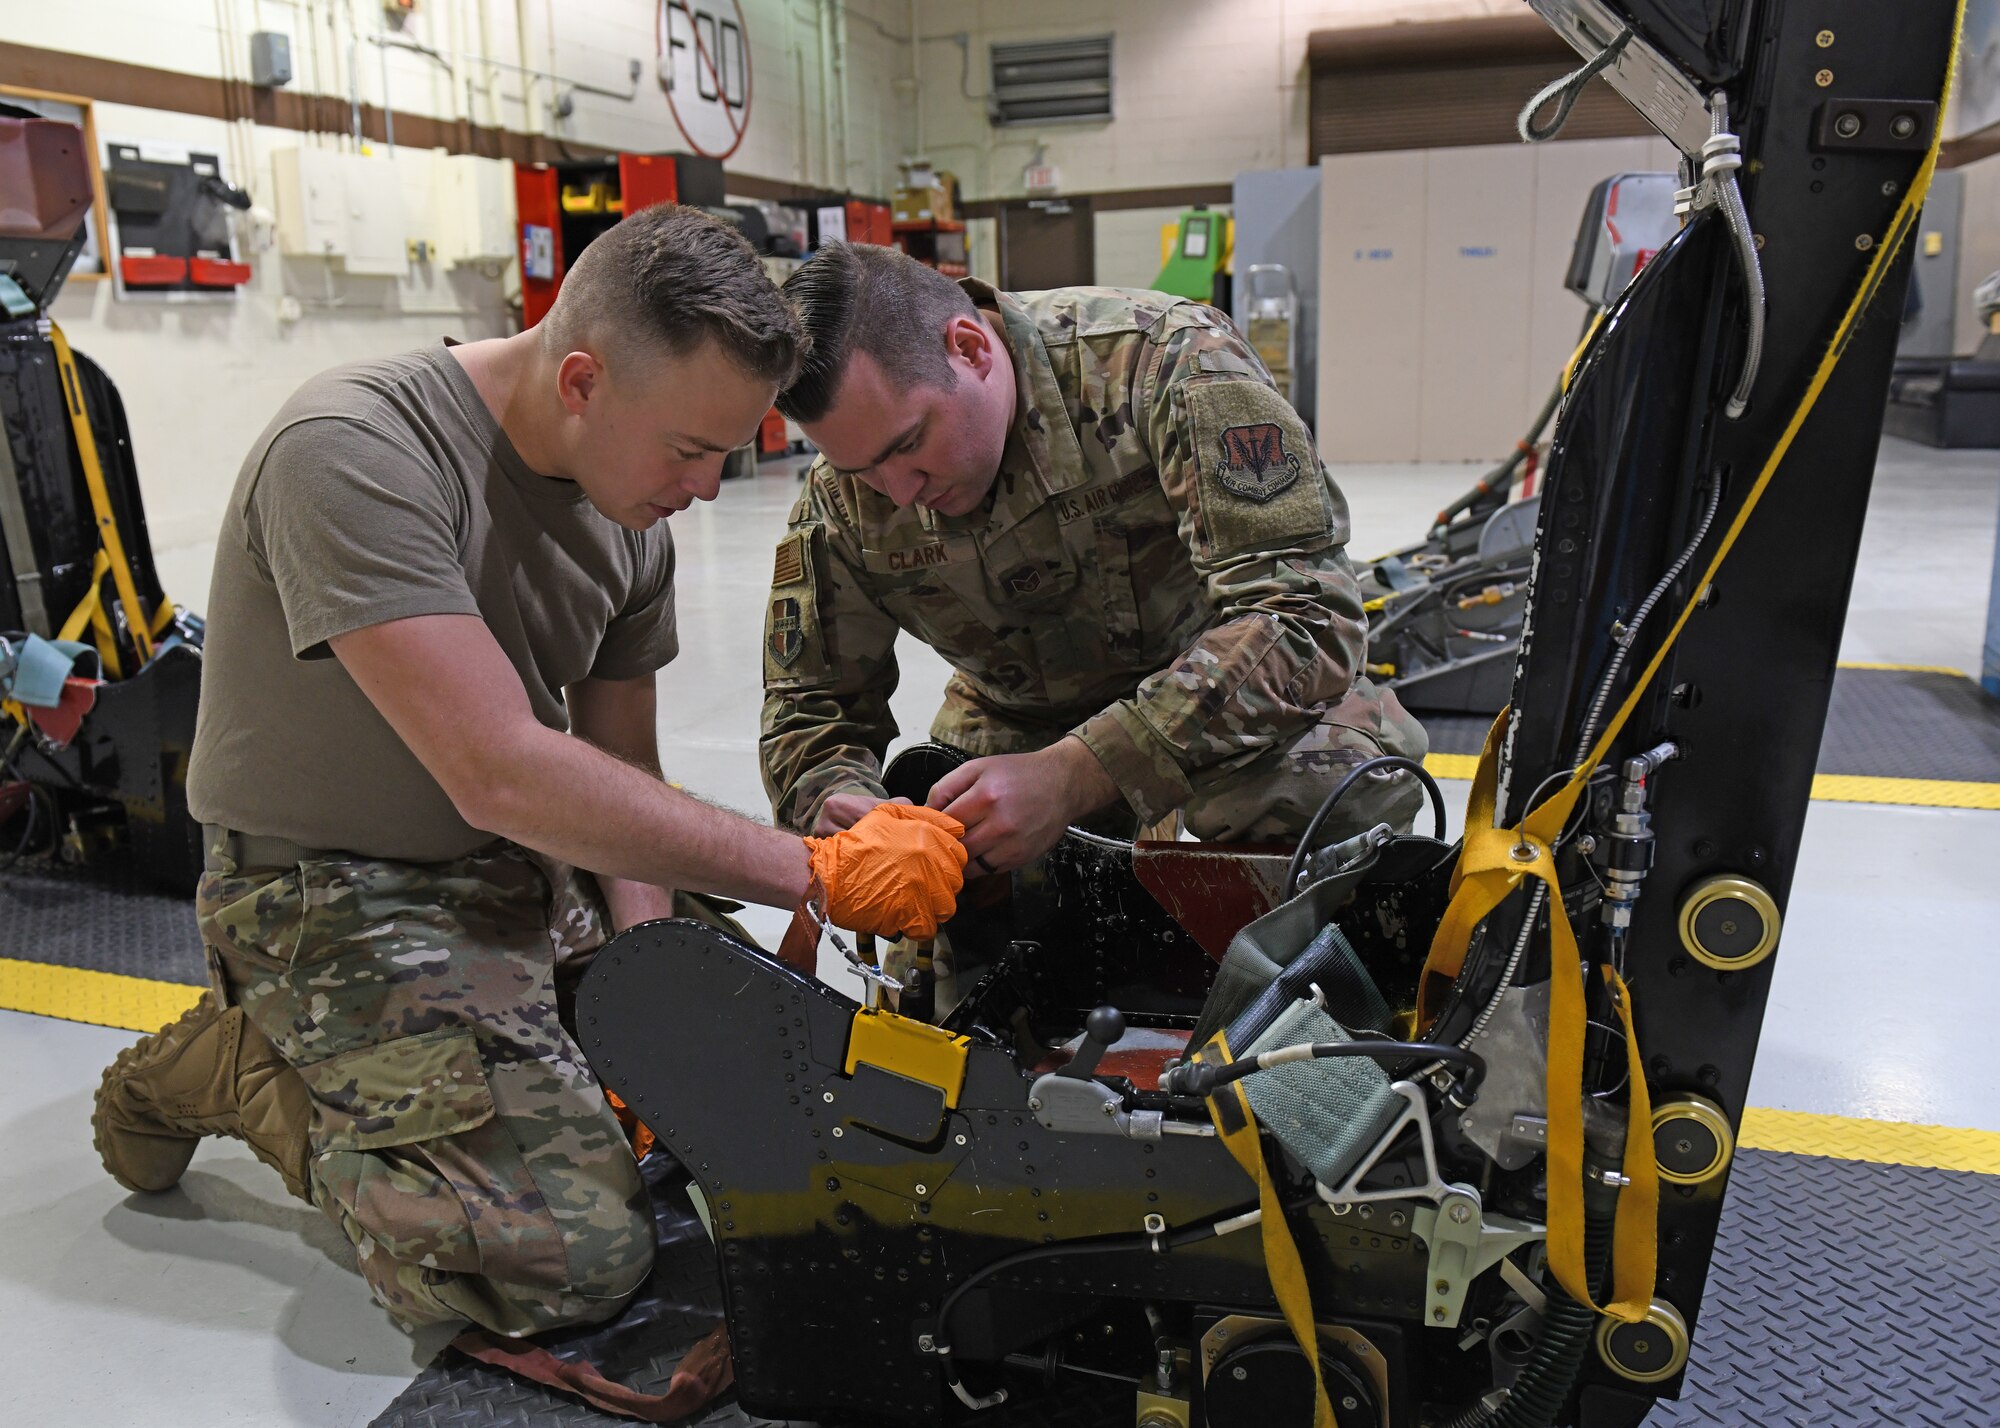 Airman 1st Class Robert Dumbeck (left), 9th Maintenance Squadron aircrew egress systems journeyman, and Tech. Sgt. Cody Clark 9th MXS aircrew egress systems craftsman, inspect an egress seat D-ring before installing a D-ring guard, Jan. 16, 2020 at Beale Air Force Base, California. When a pilot pulls the D-ring, it fires an initiator that sends gas pressure to explosives. Each of these explosives fire at different items like the lap belt, inertia reel, and foot retractors. (U.S. Air Force photo by Airman 1st Class Luis A. Ruiz-Vazquez)